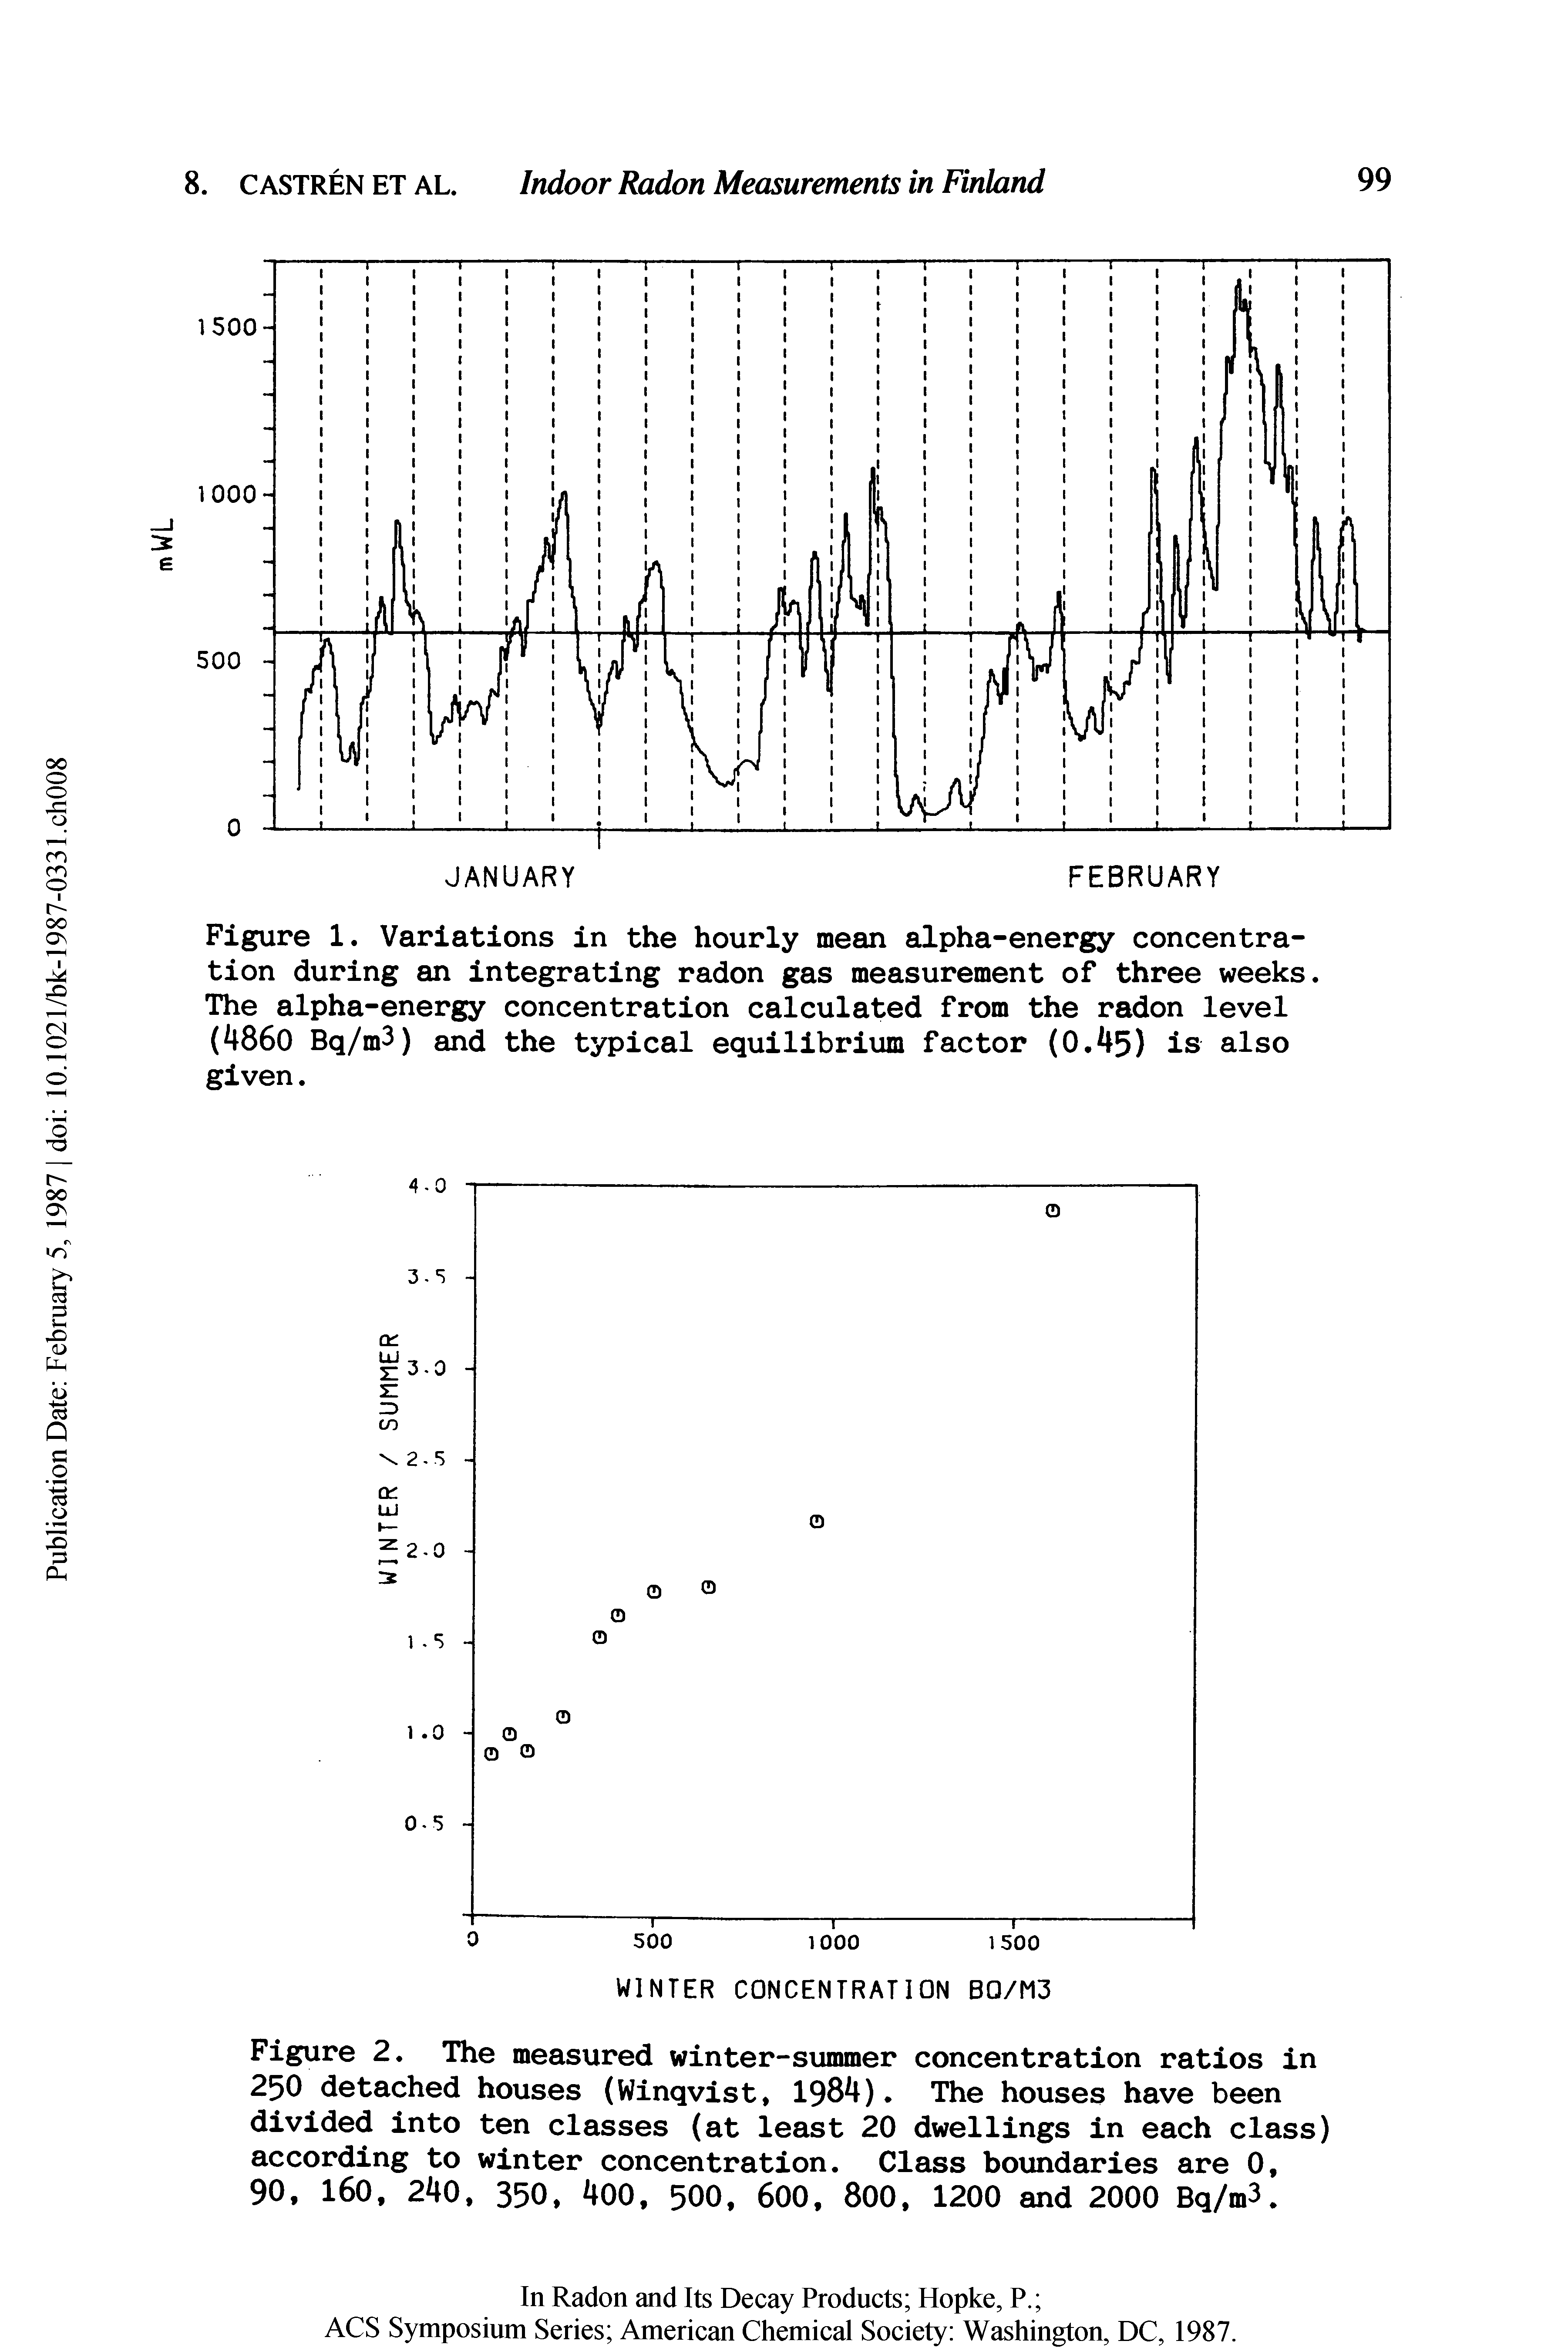 Figure 1. Variations in the hourly mean alpha-energy concentration during an integrating radon gas measurement of three weeks The alpha-energy concentration calculated from the radon level (4860 Bq/m3) and the typical equilibrium factor (0.45) is also given.